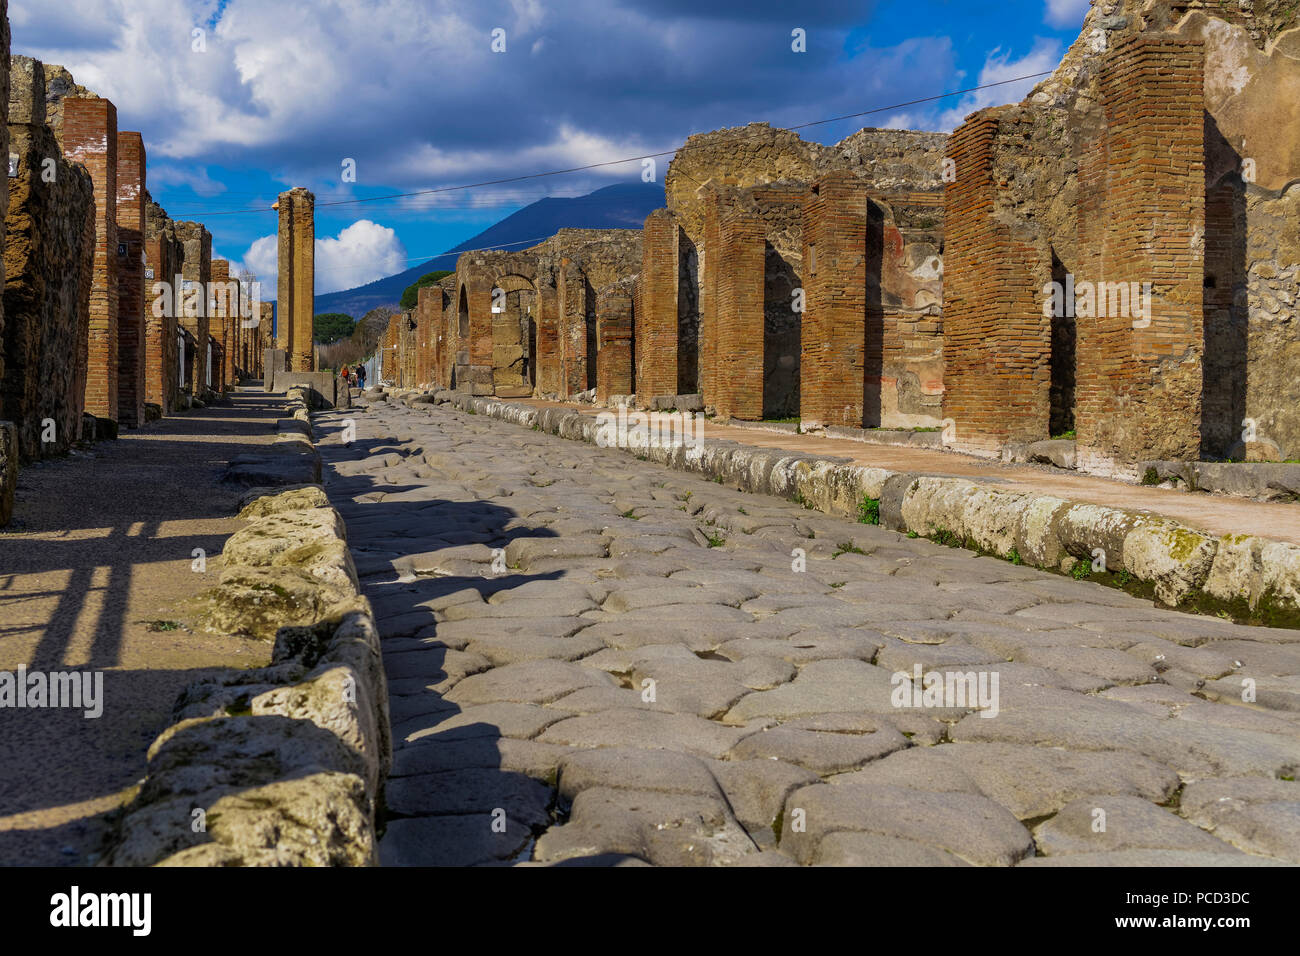 Wide street lined with plebeians houses and structured formation of cobblestoned path with higher kerbs to wash away debris, Pompeii, UNESCO, Italy Stock Photo